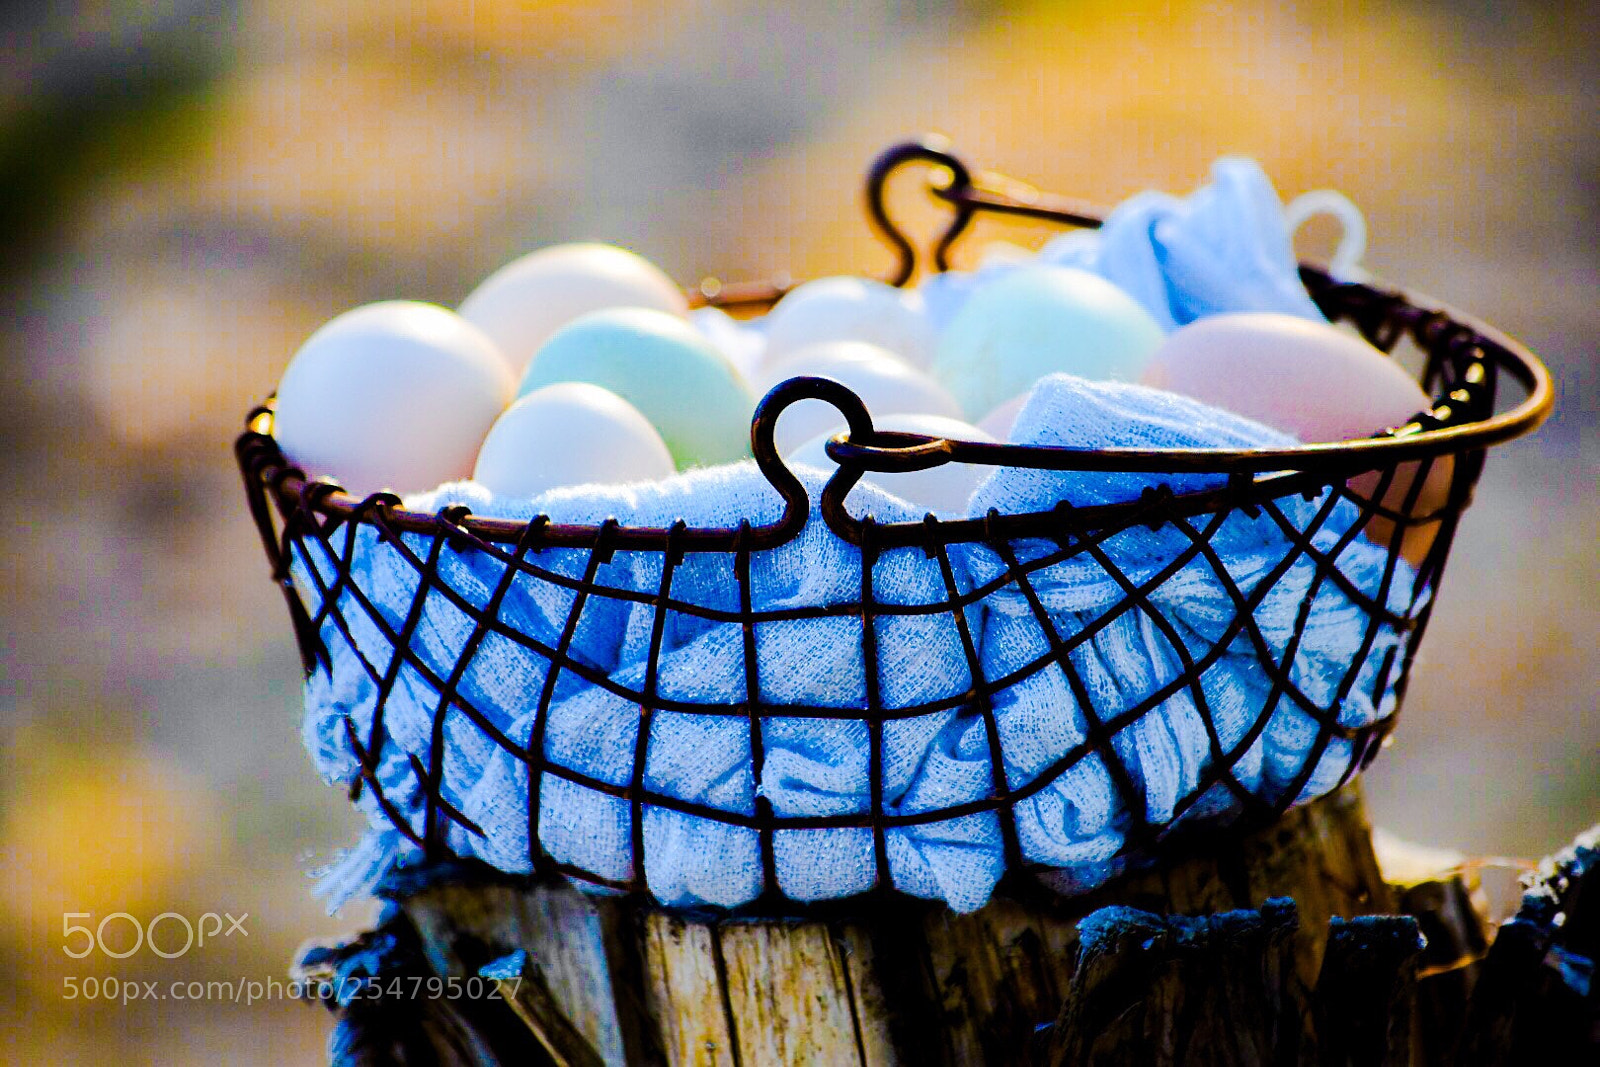 Nikon D5500 sample photo. Wire basket full of photography